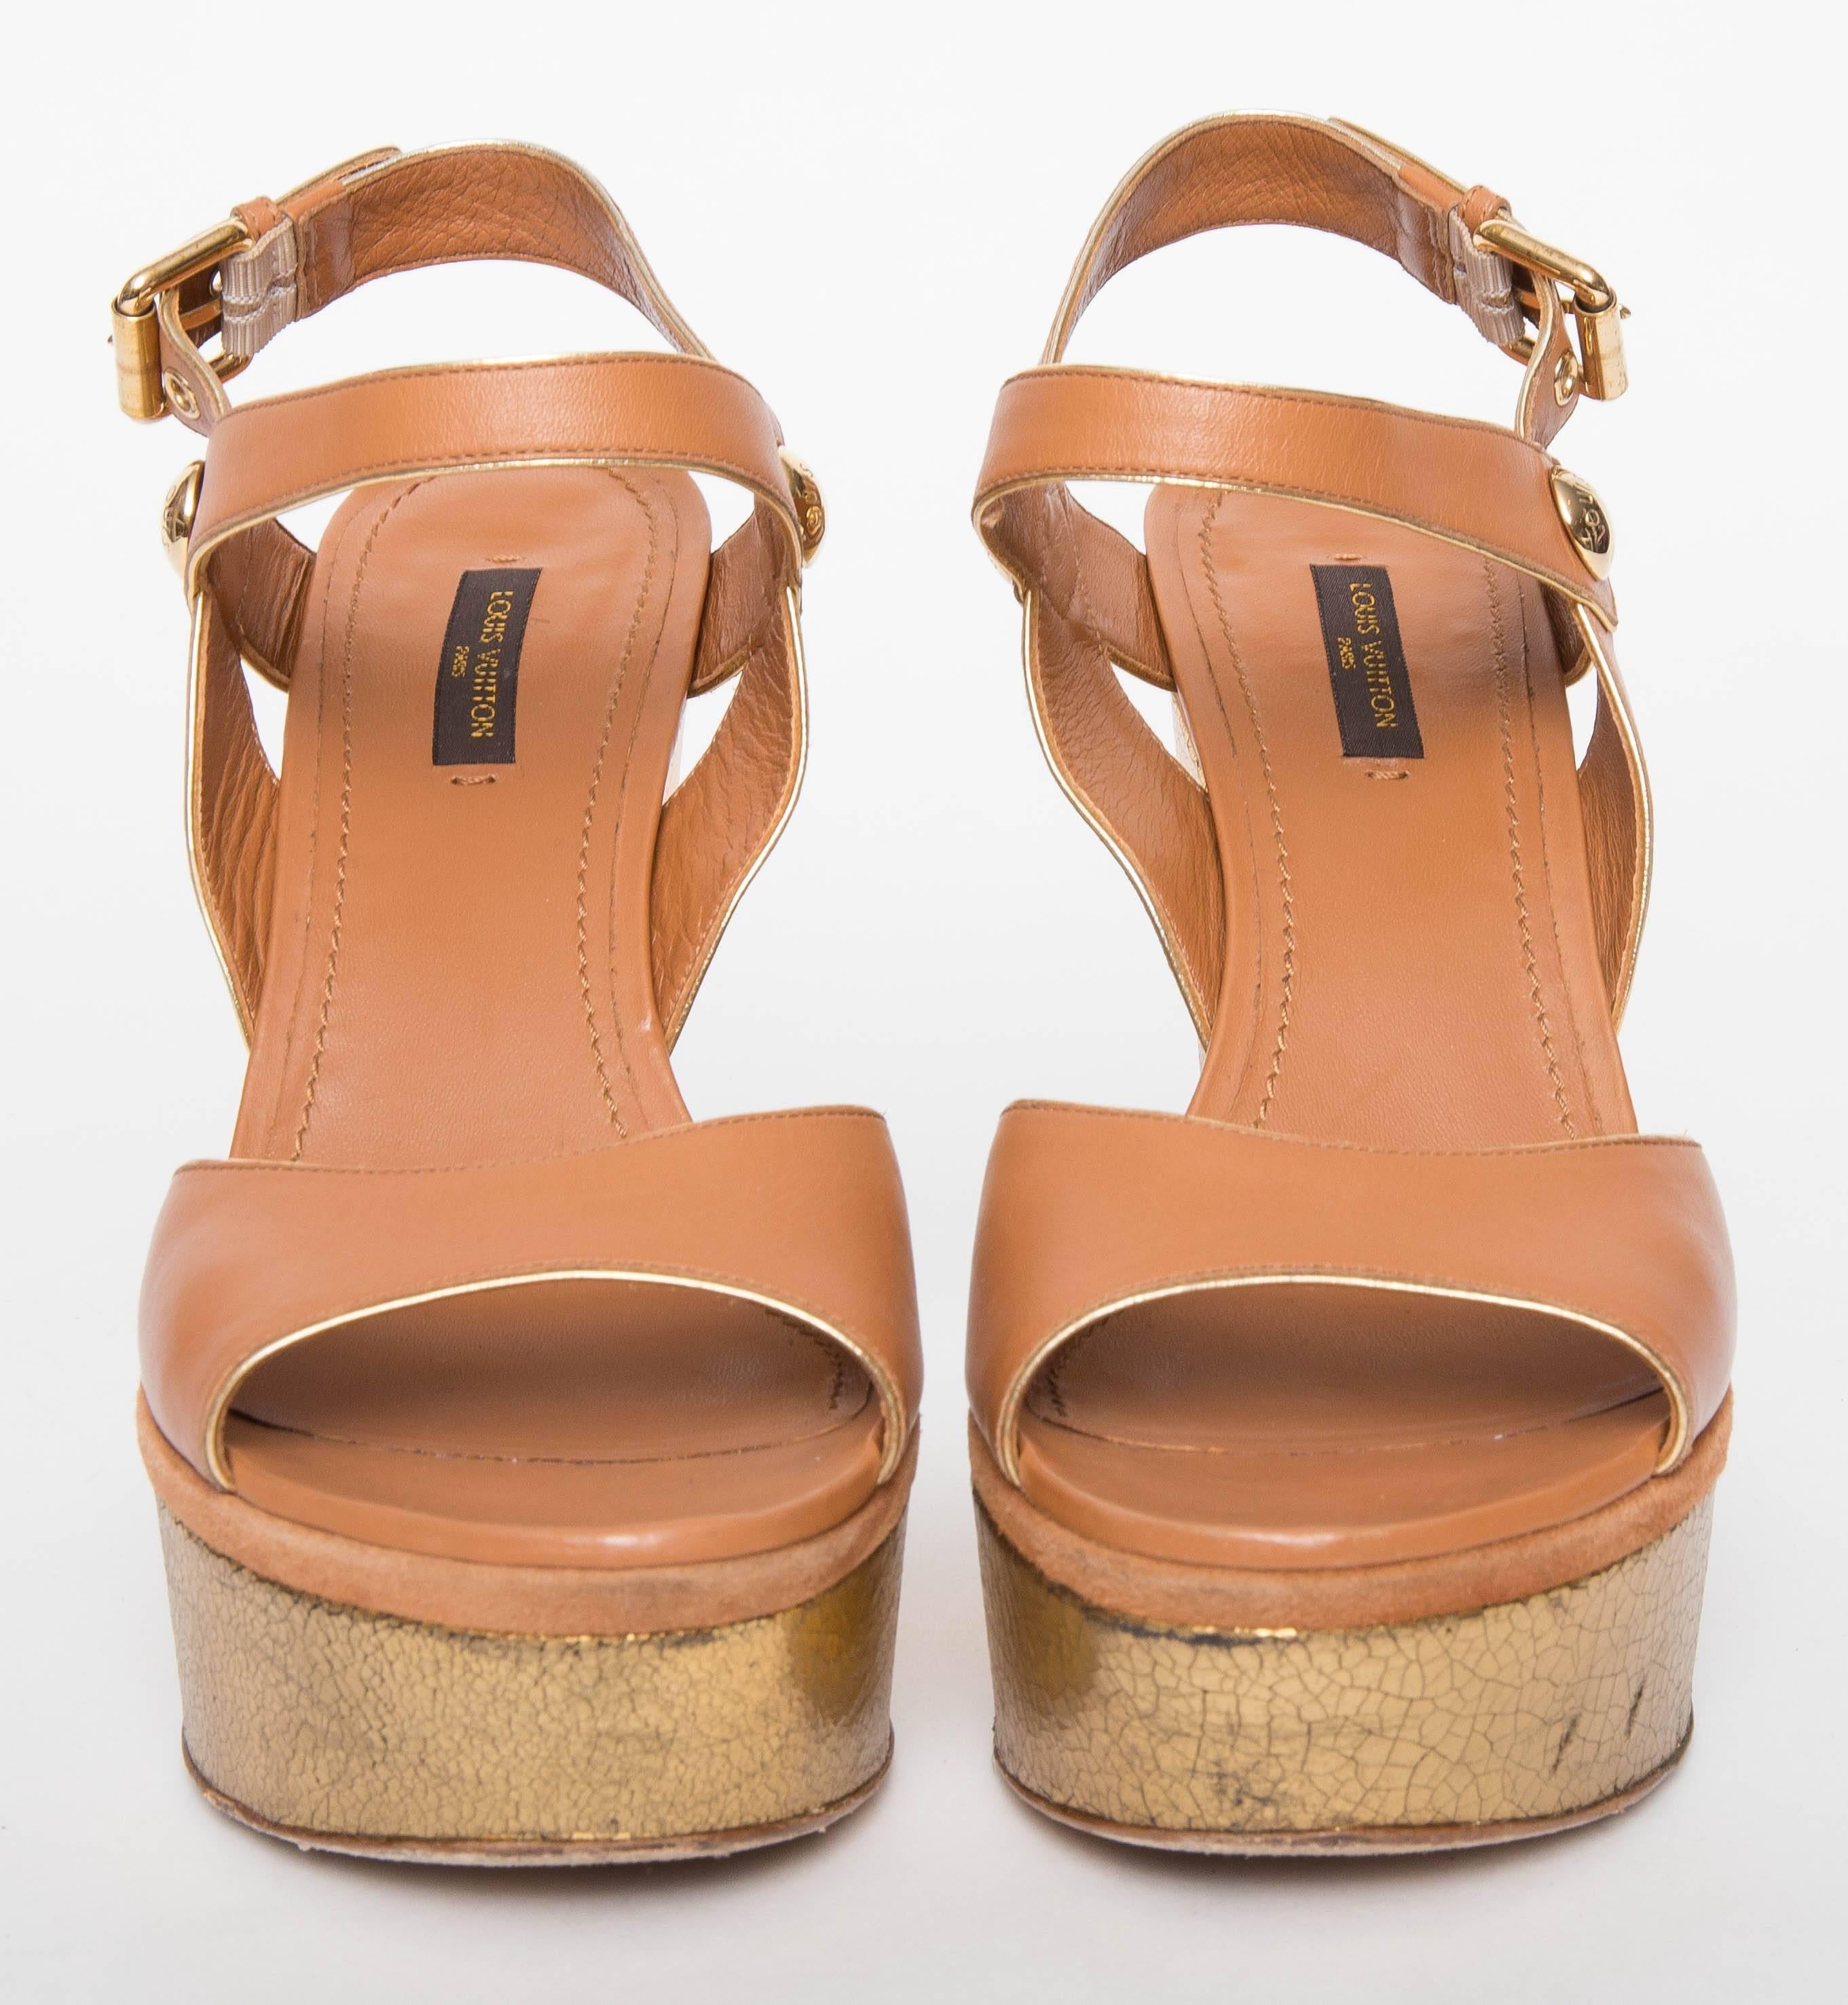 Louise  platform Vuitton Cruise 2013 Liner Sandal in tan leather upper trimmed in gold and gold crackle platforms. Gold toned hardware. Adjustable buckle ankle strap.
Does not come with original box.